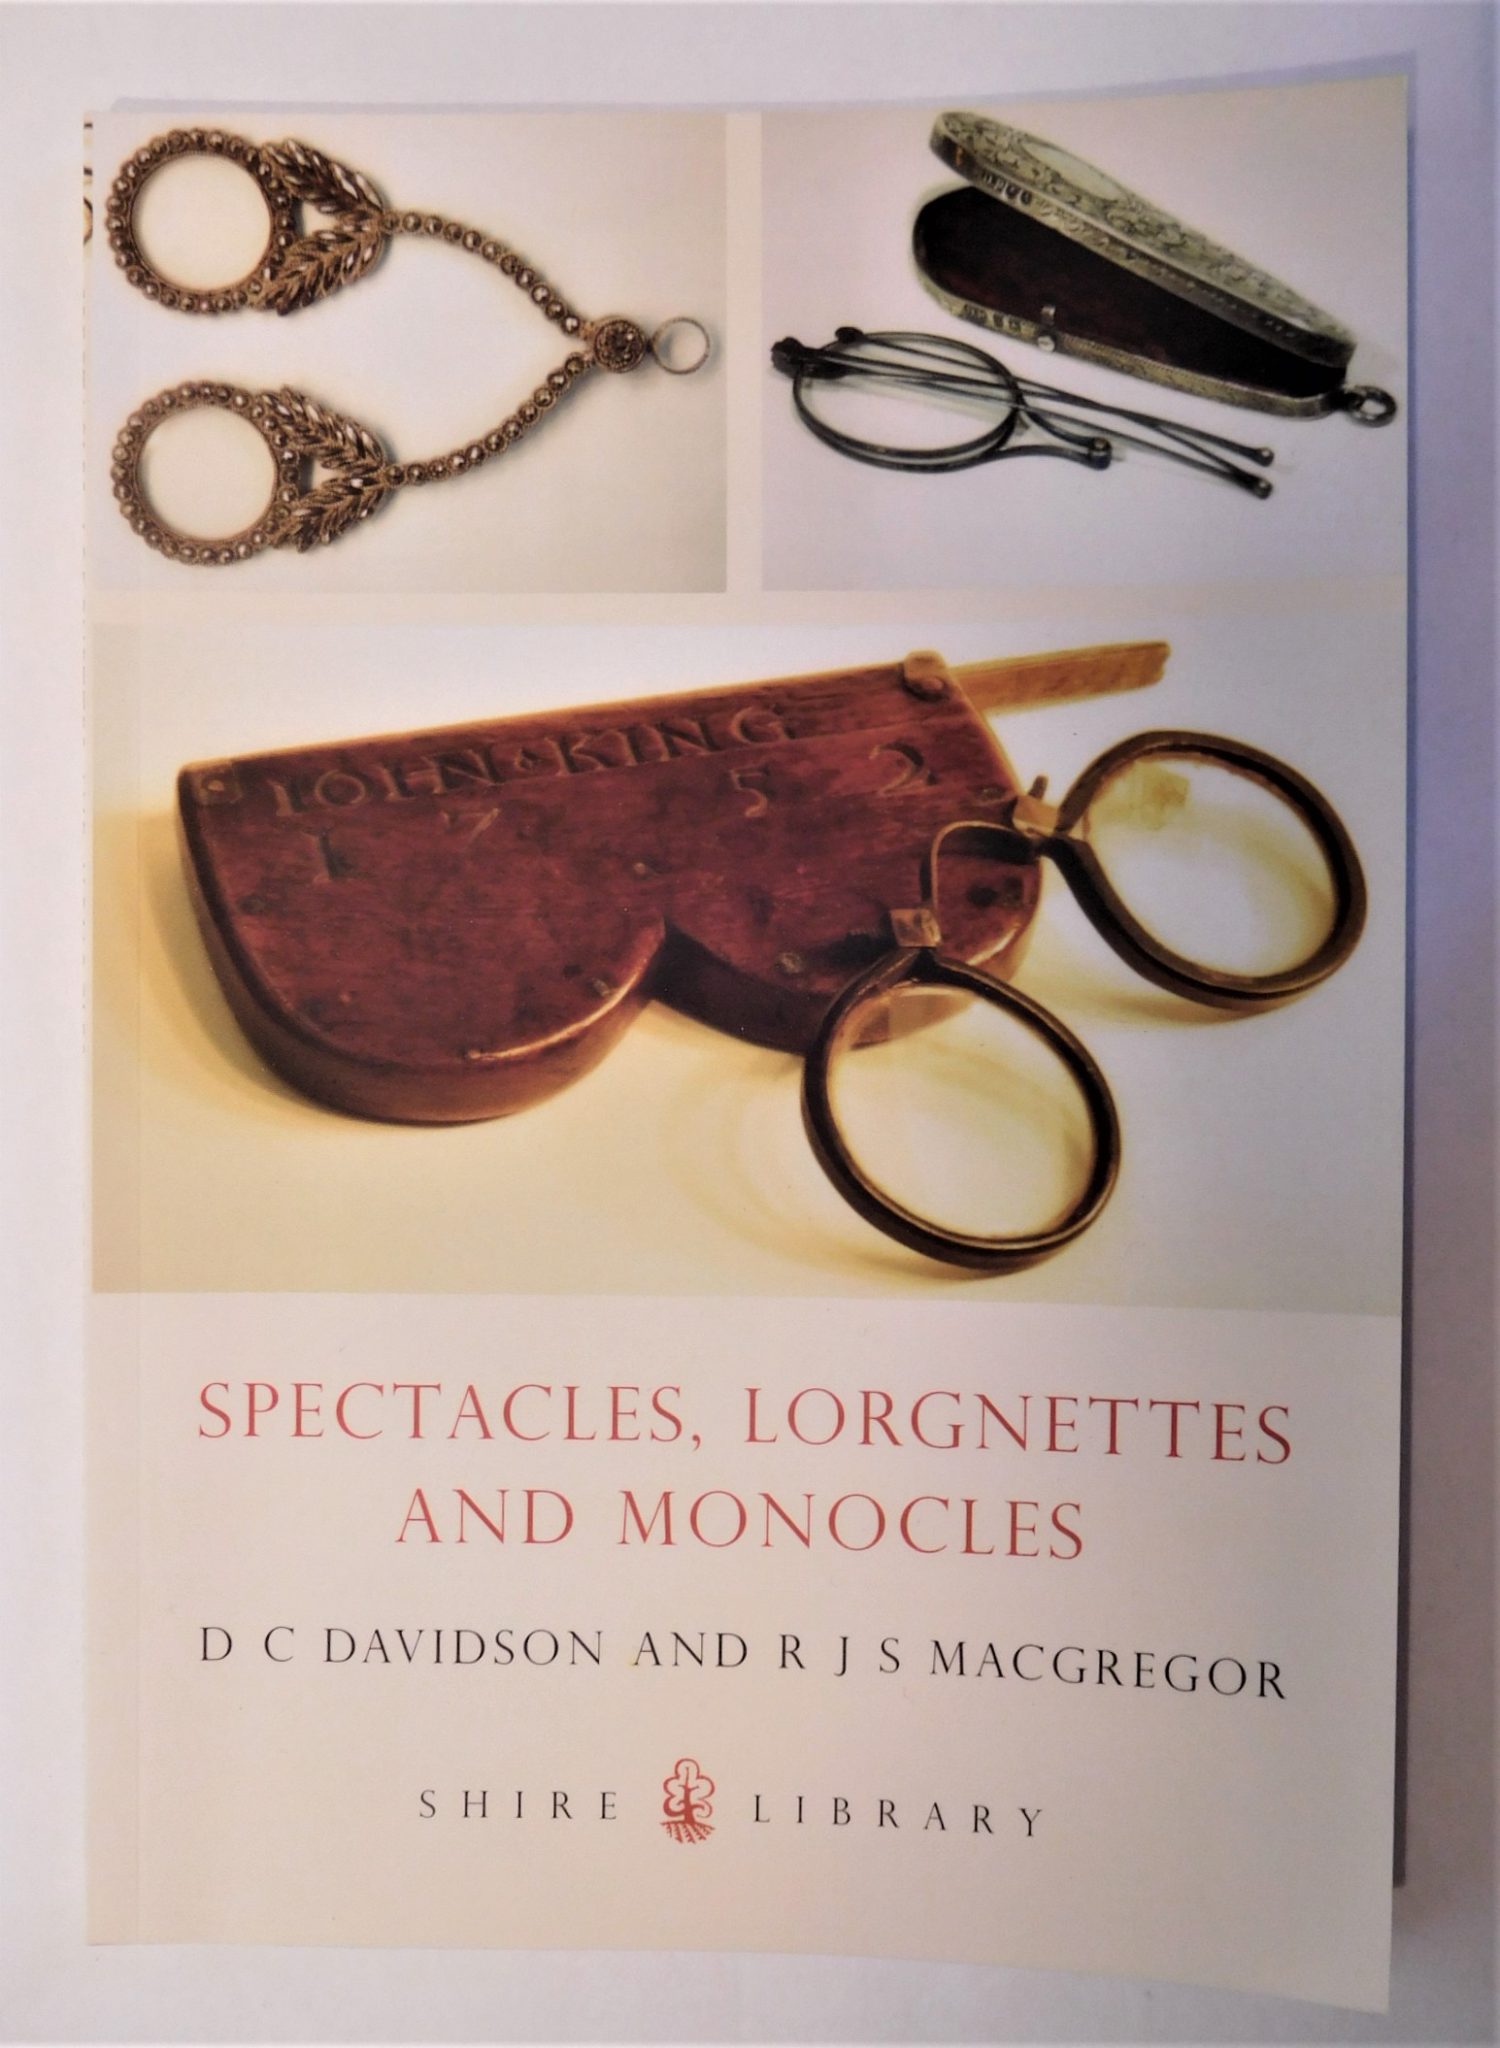 Title SPECTACLES. LORGNETTES AND MONOCLES